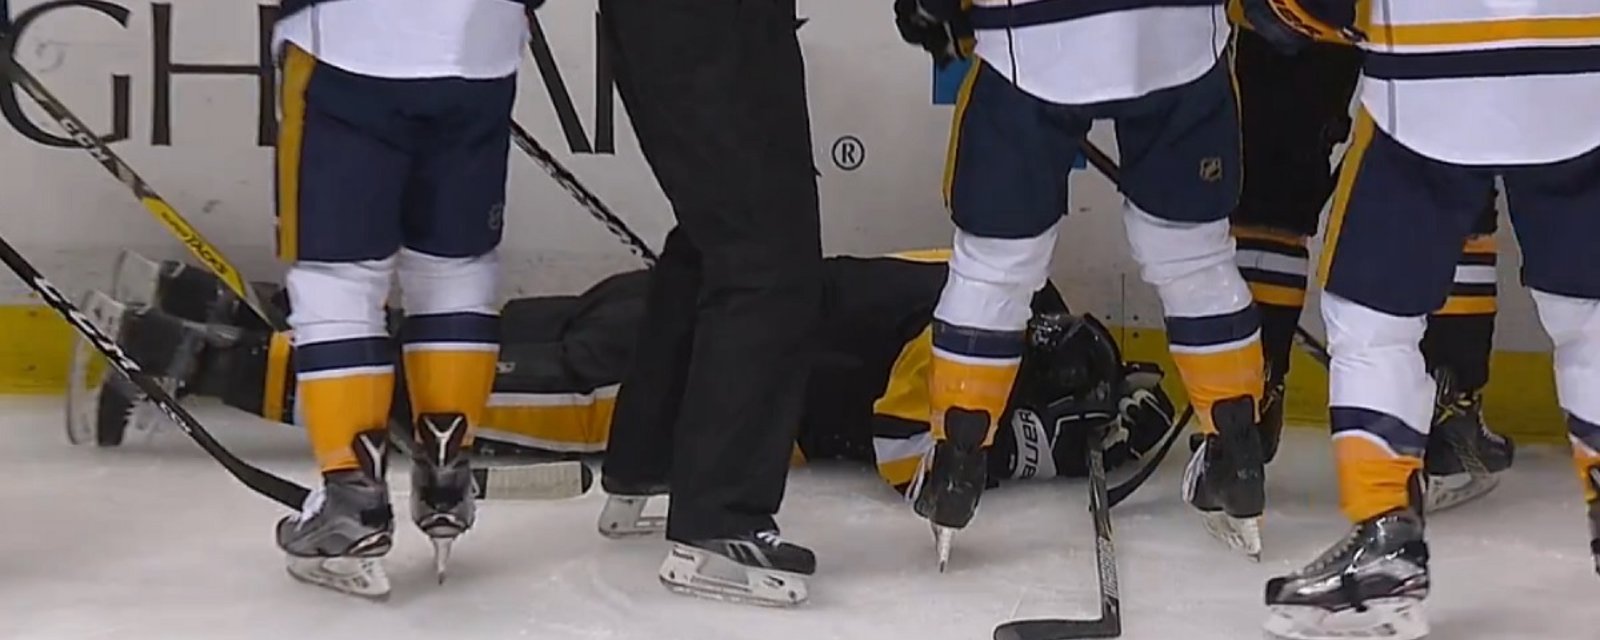 Breaking: Penguins forward hurt early in Game 2 after huge hit from behind!